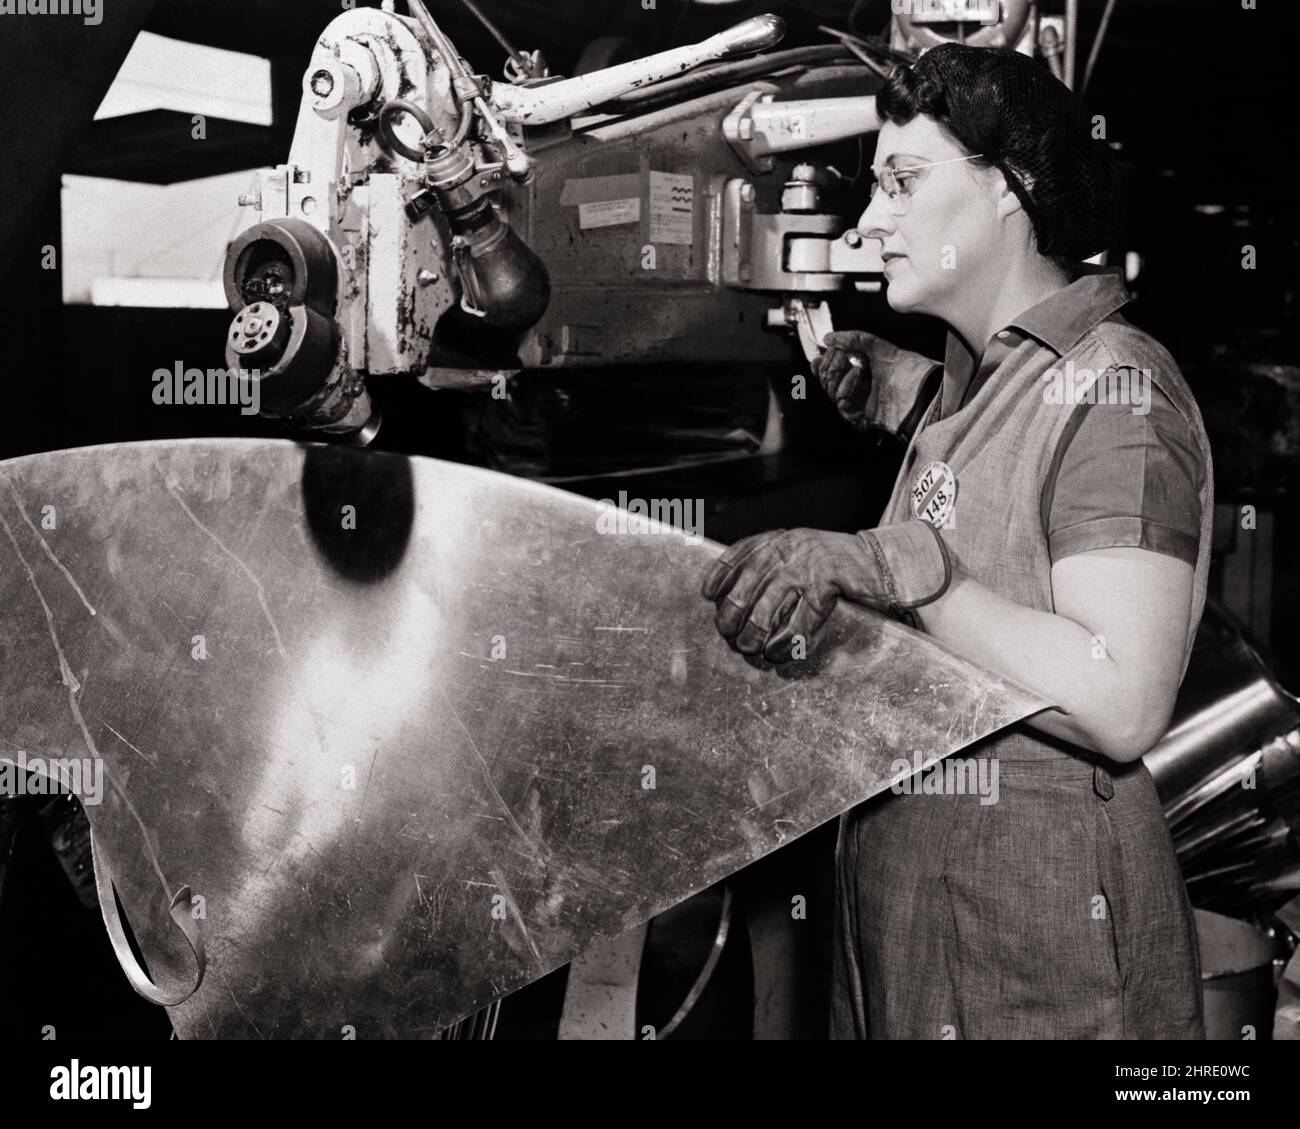 1940s WOMAN WORLD WAR 2 UNIDENTIFIED DEFENSE FACTORY METAL FABRICATOR WORKER DOUGLAS AIRCRAFT LONG BEACH SOUTHERN CALIFORNIA USA - i3970 HAR001 HARS COPY SPACE HALF-LENGTH LADIES PERSONS INSPIRATION UNITED STATES OF AMERICA RISK B&W NORTH AMERICA NORTH AMERICAN SUCCESS SKILL OCCUPATION SKILLS HEAD AND SHOULDERS GLOBAL STRENGTH VICTORY DOUGLAS CHOICE EFFORT KNOWLEDGE LOW ANGLE POWERFUL PROGRESS WORLD WARS INNOVATION LABOR PRIDE WORLD WAR WORLD WAR TWO WORLD WAR II LONG BEACH OPPORTUNITY CA EMPLOYMENT OCCUPATIONS SOUTHERN UNIDENTIFIED CONCEPTUAL STYLISH WORLD WAR 2 INFRASTRUCTURE EMPLOYEE Stock Photo